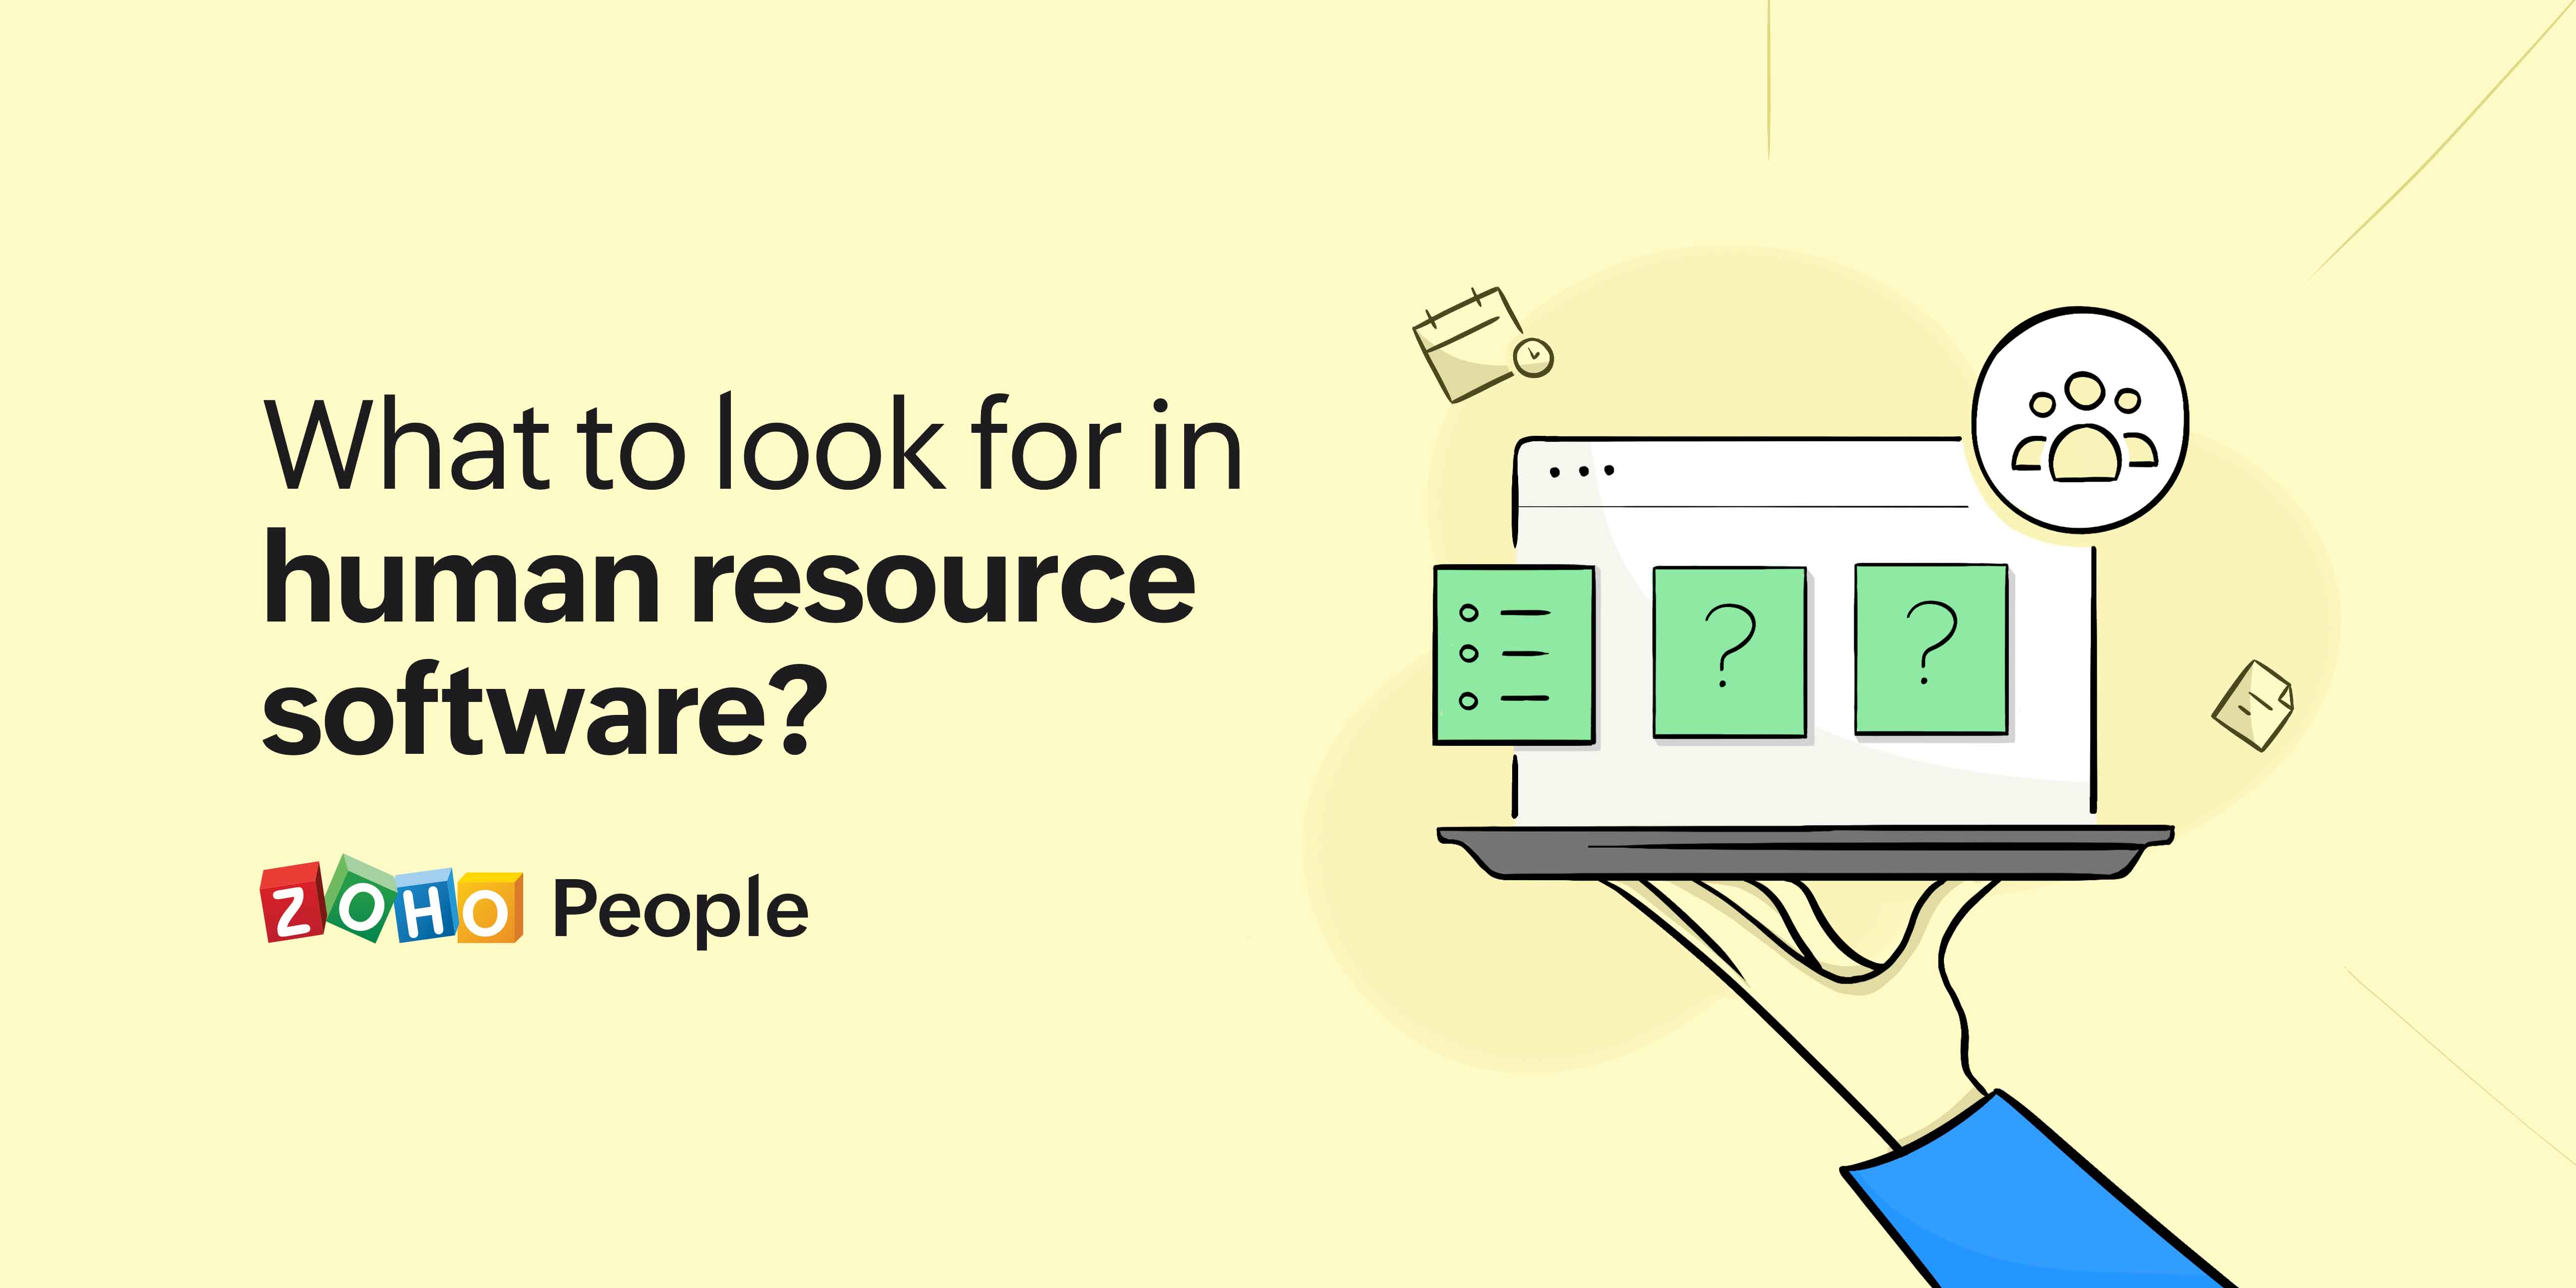 What to look for in human resource software?